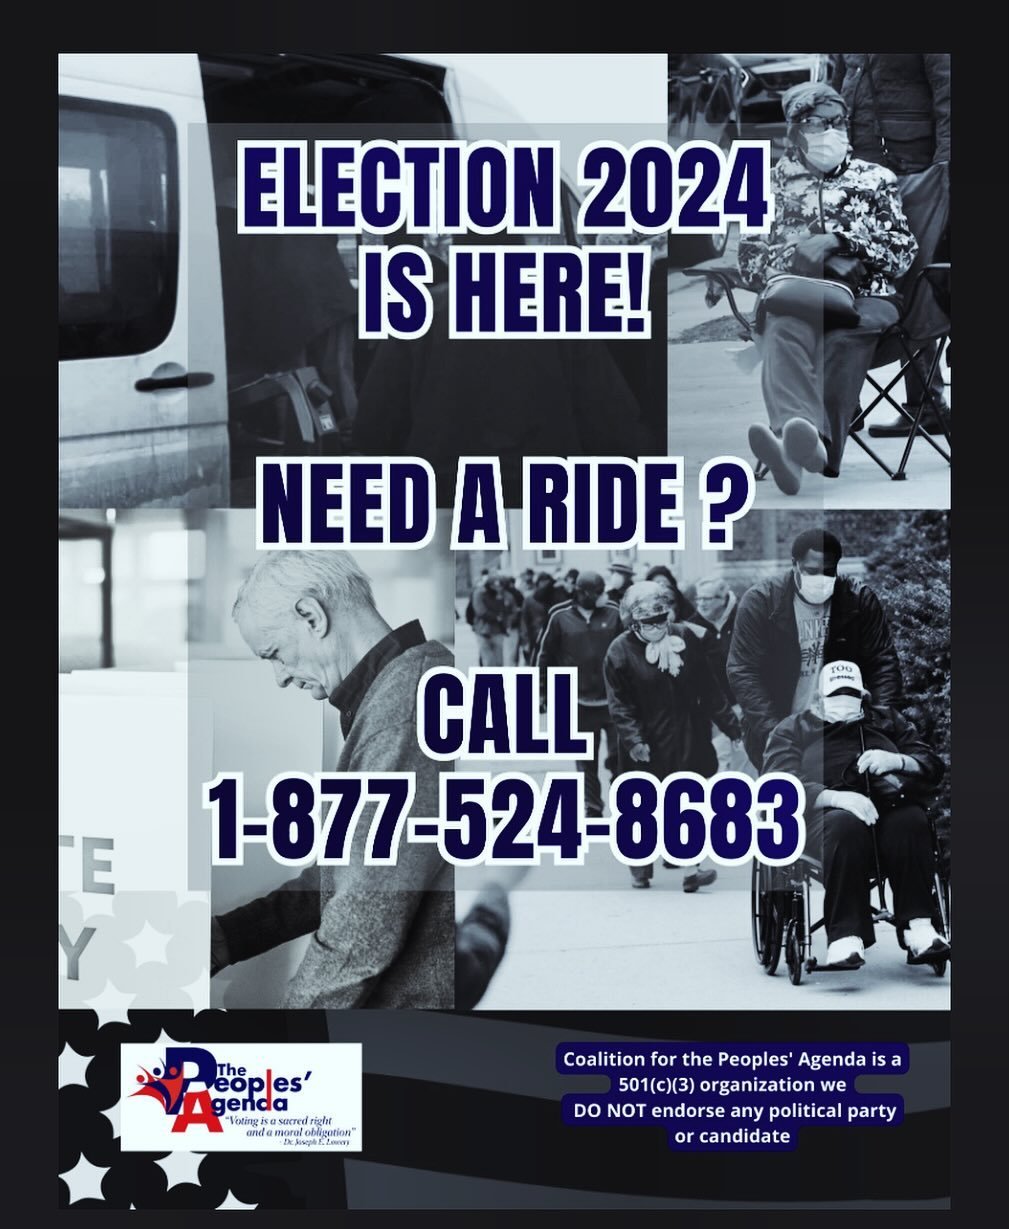 Call 1-877-524-8683 for a ride to the voting precincts. Do not miss your opportunity to vote! 🗳️